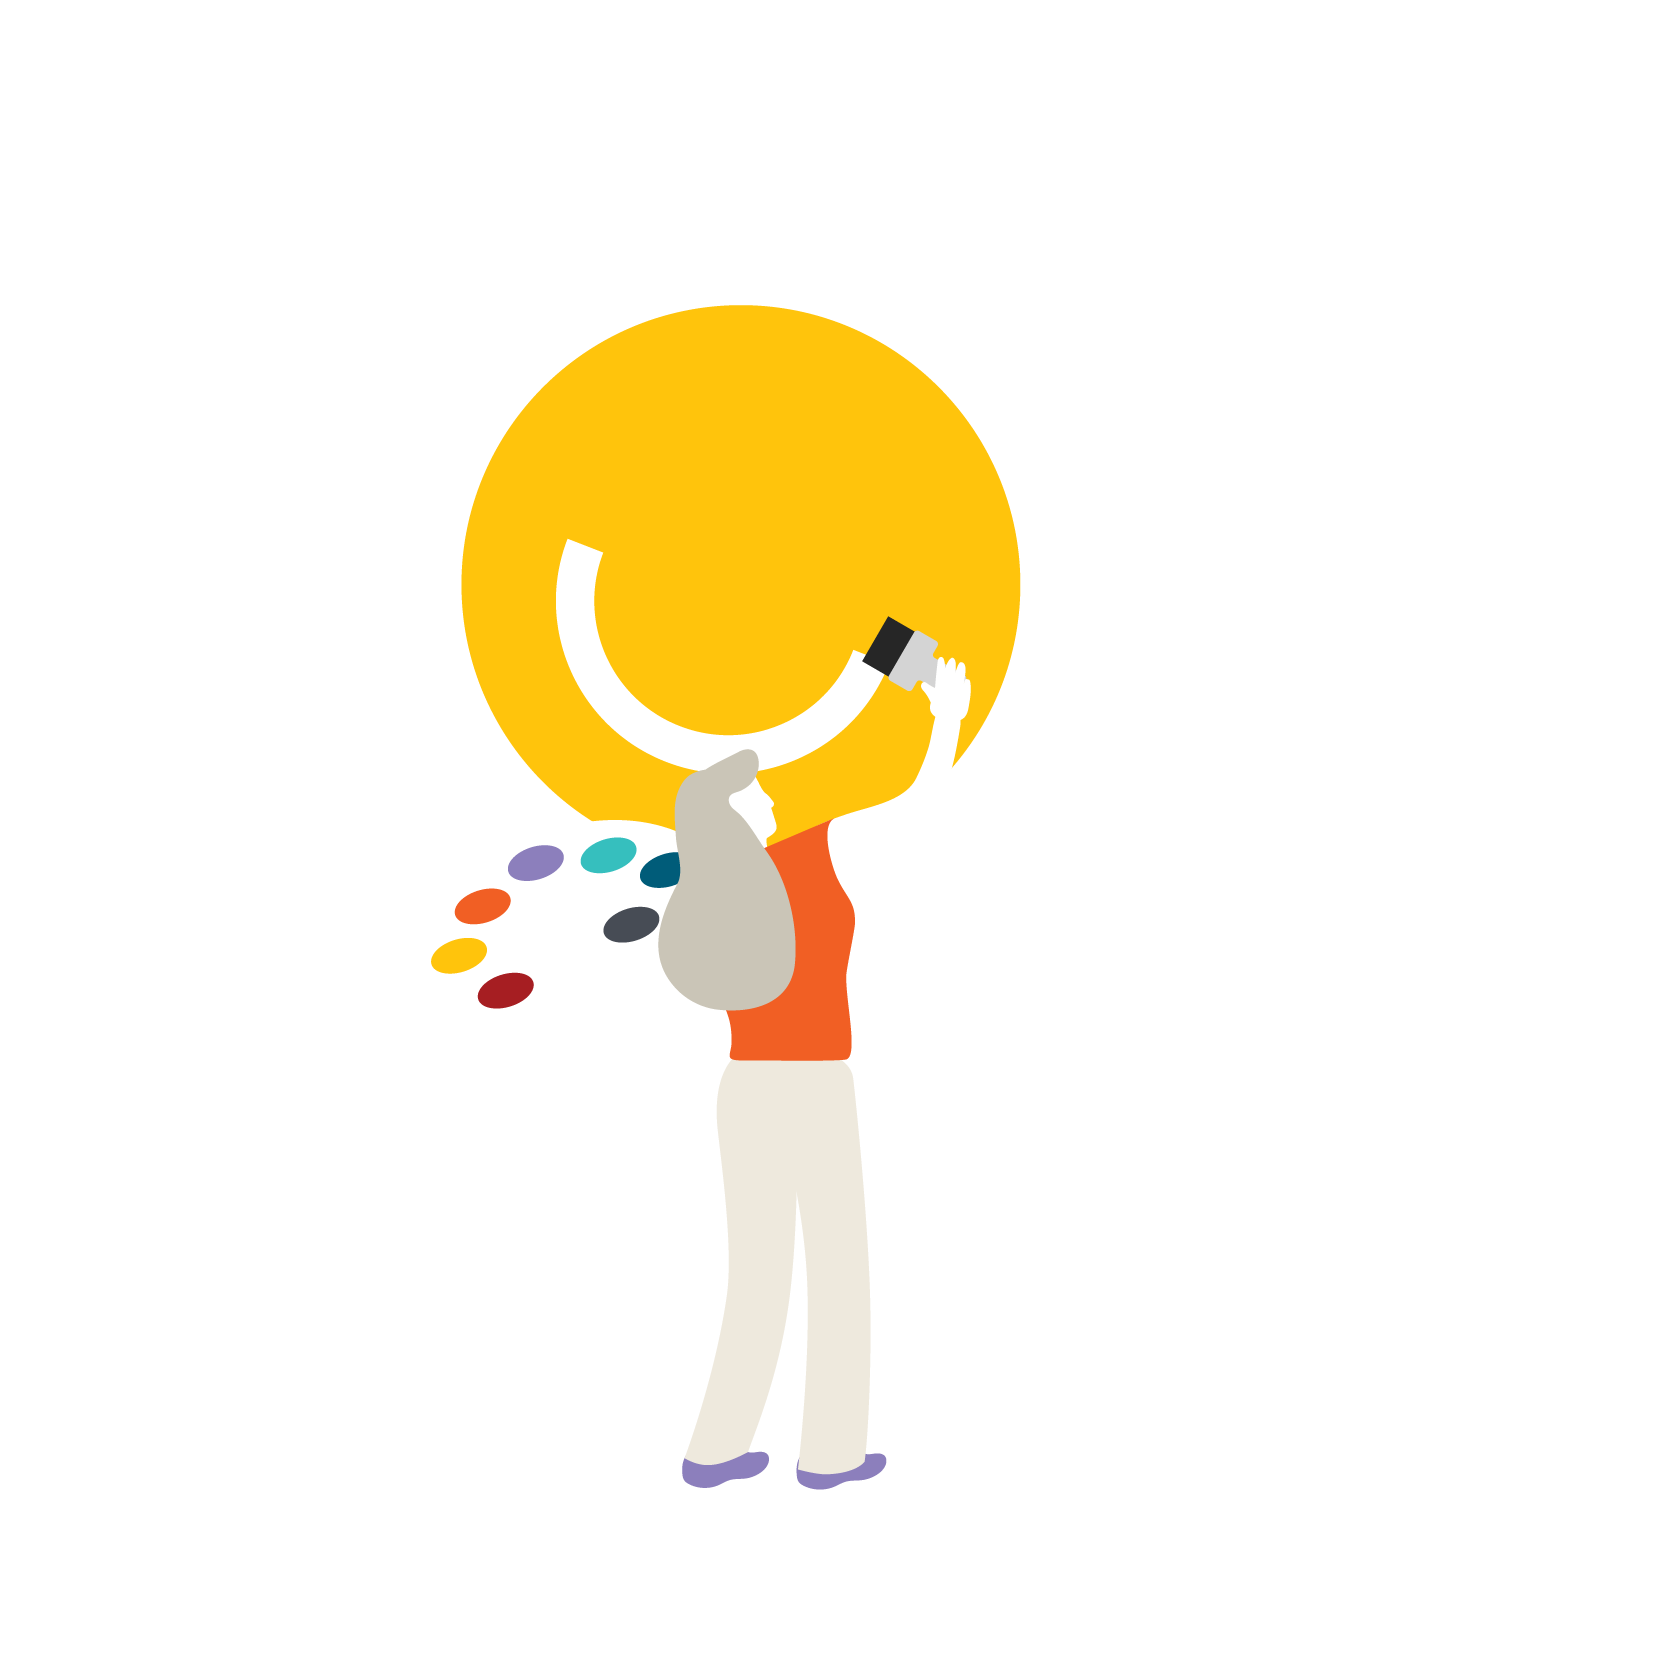 Illustration of woman holding a painters palette painting a smile on the sun to depict real wellbeing